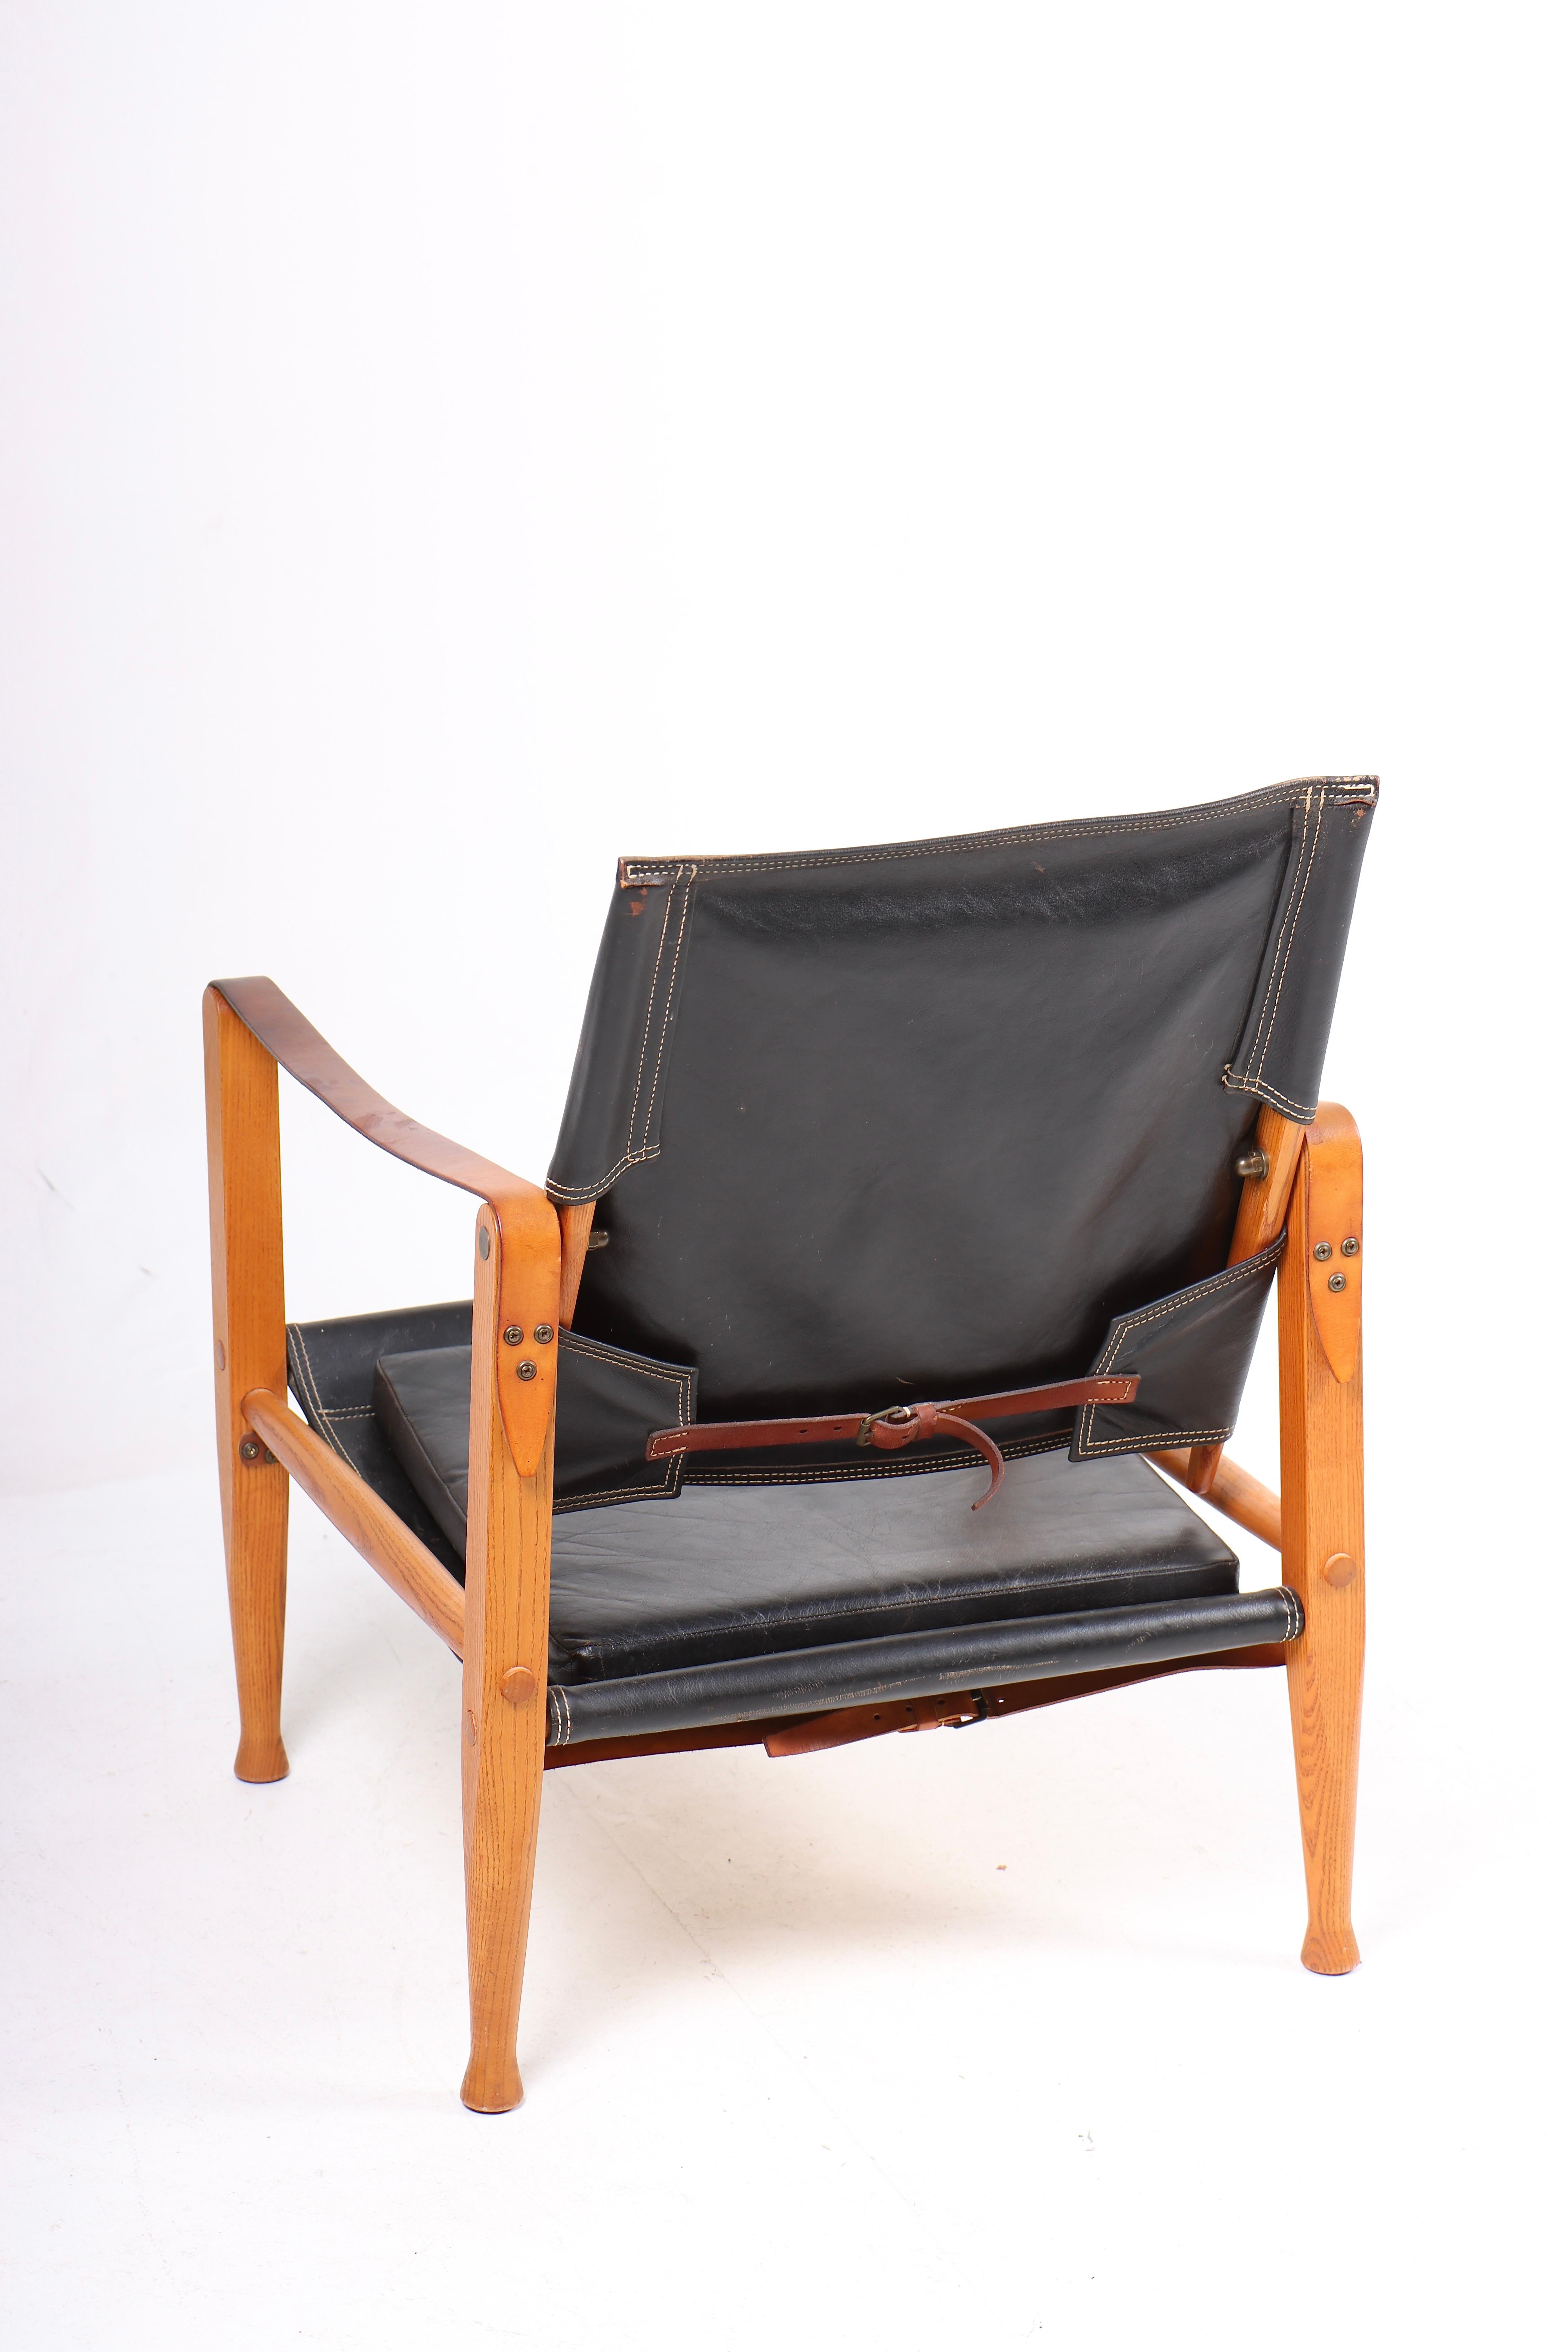 Mid-20th Century Midcentury Danish Design Lounge Chair in Patianted Leather by Klint For Sale